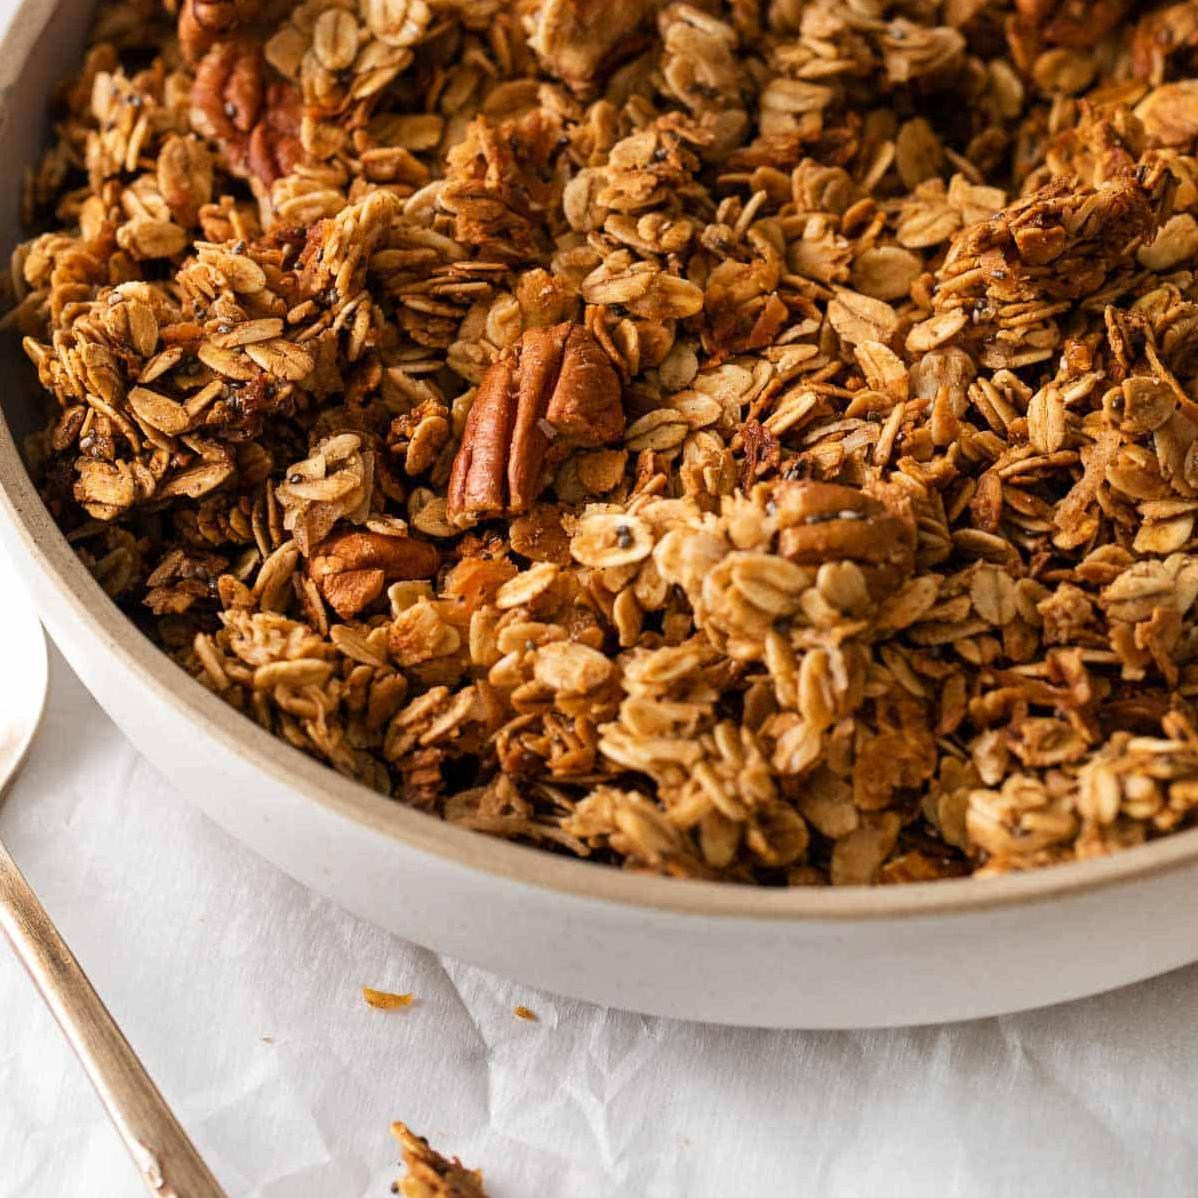  Fuel your day with this healthy and hearty granola